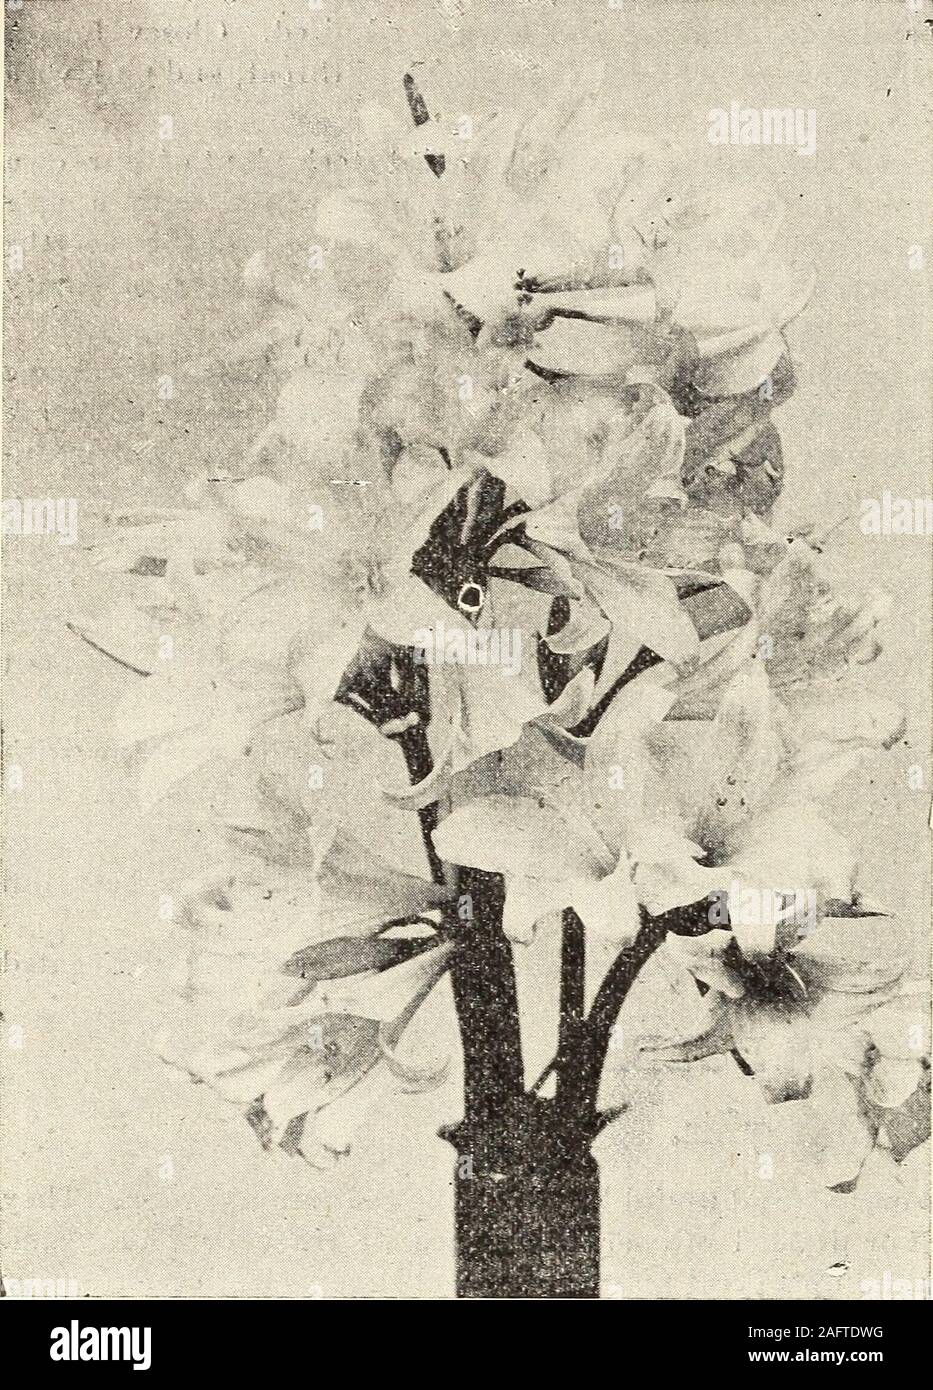 . 1905-'06 descriptive catalogue of rare flowers : seeds, plants, bulbs, cacti, etc. ink, lily like, on slender stems. Not new,but very beautiful.5c each: 50c doz. postpaid. Alba. A valuable variety for pots, and for the open border; it is evergreen, very easilygrown, increases fast; a border of the large star-like white flowers in bloom is very handsome.The flowers keep for a week or ten days. 25c dozen ; $1.50 per hundred. Postage 35c per hun-dred. Add postage 5c to 10c on all large bulbs PALMS, DRACENAS, GRASSES,Rare Palms. These orand plants have been most appropriately called the Kings an Stock Photo